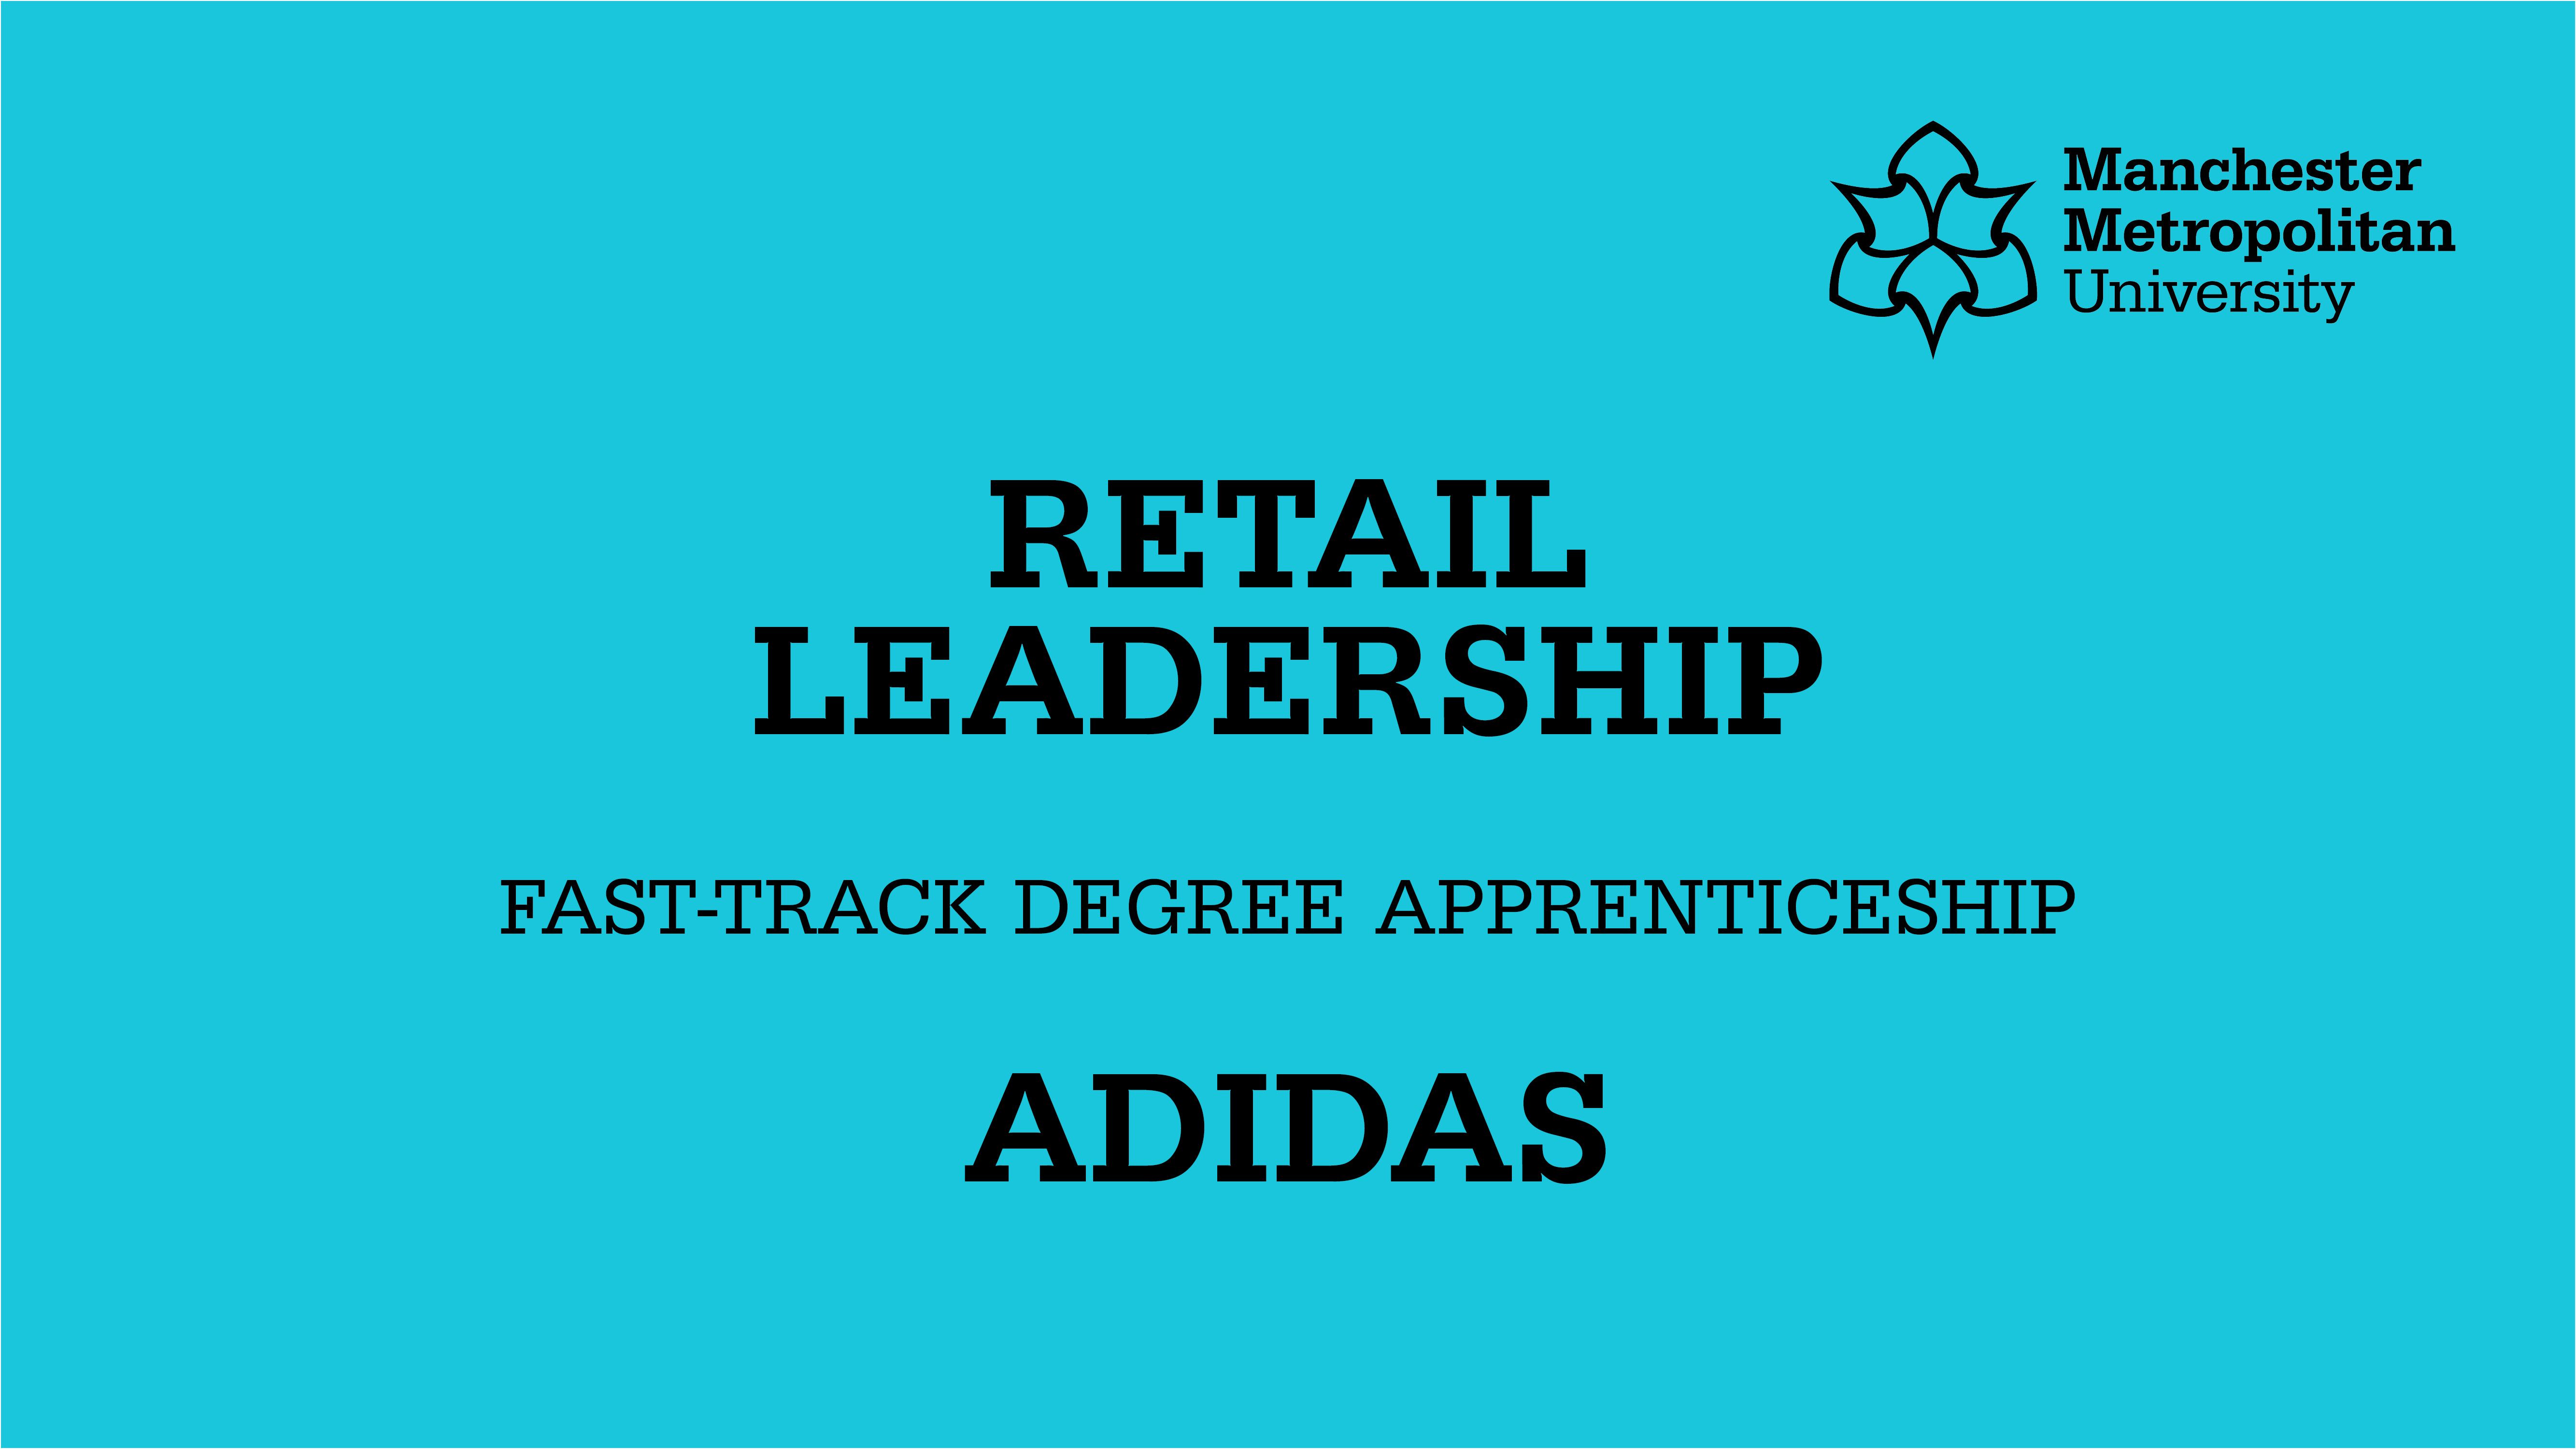 Retail Leadership Fast-Track Degree Apprenticeship with Adidas